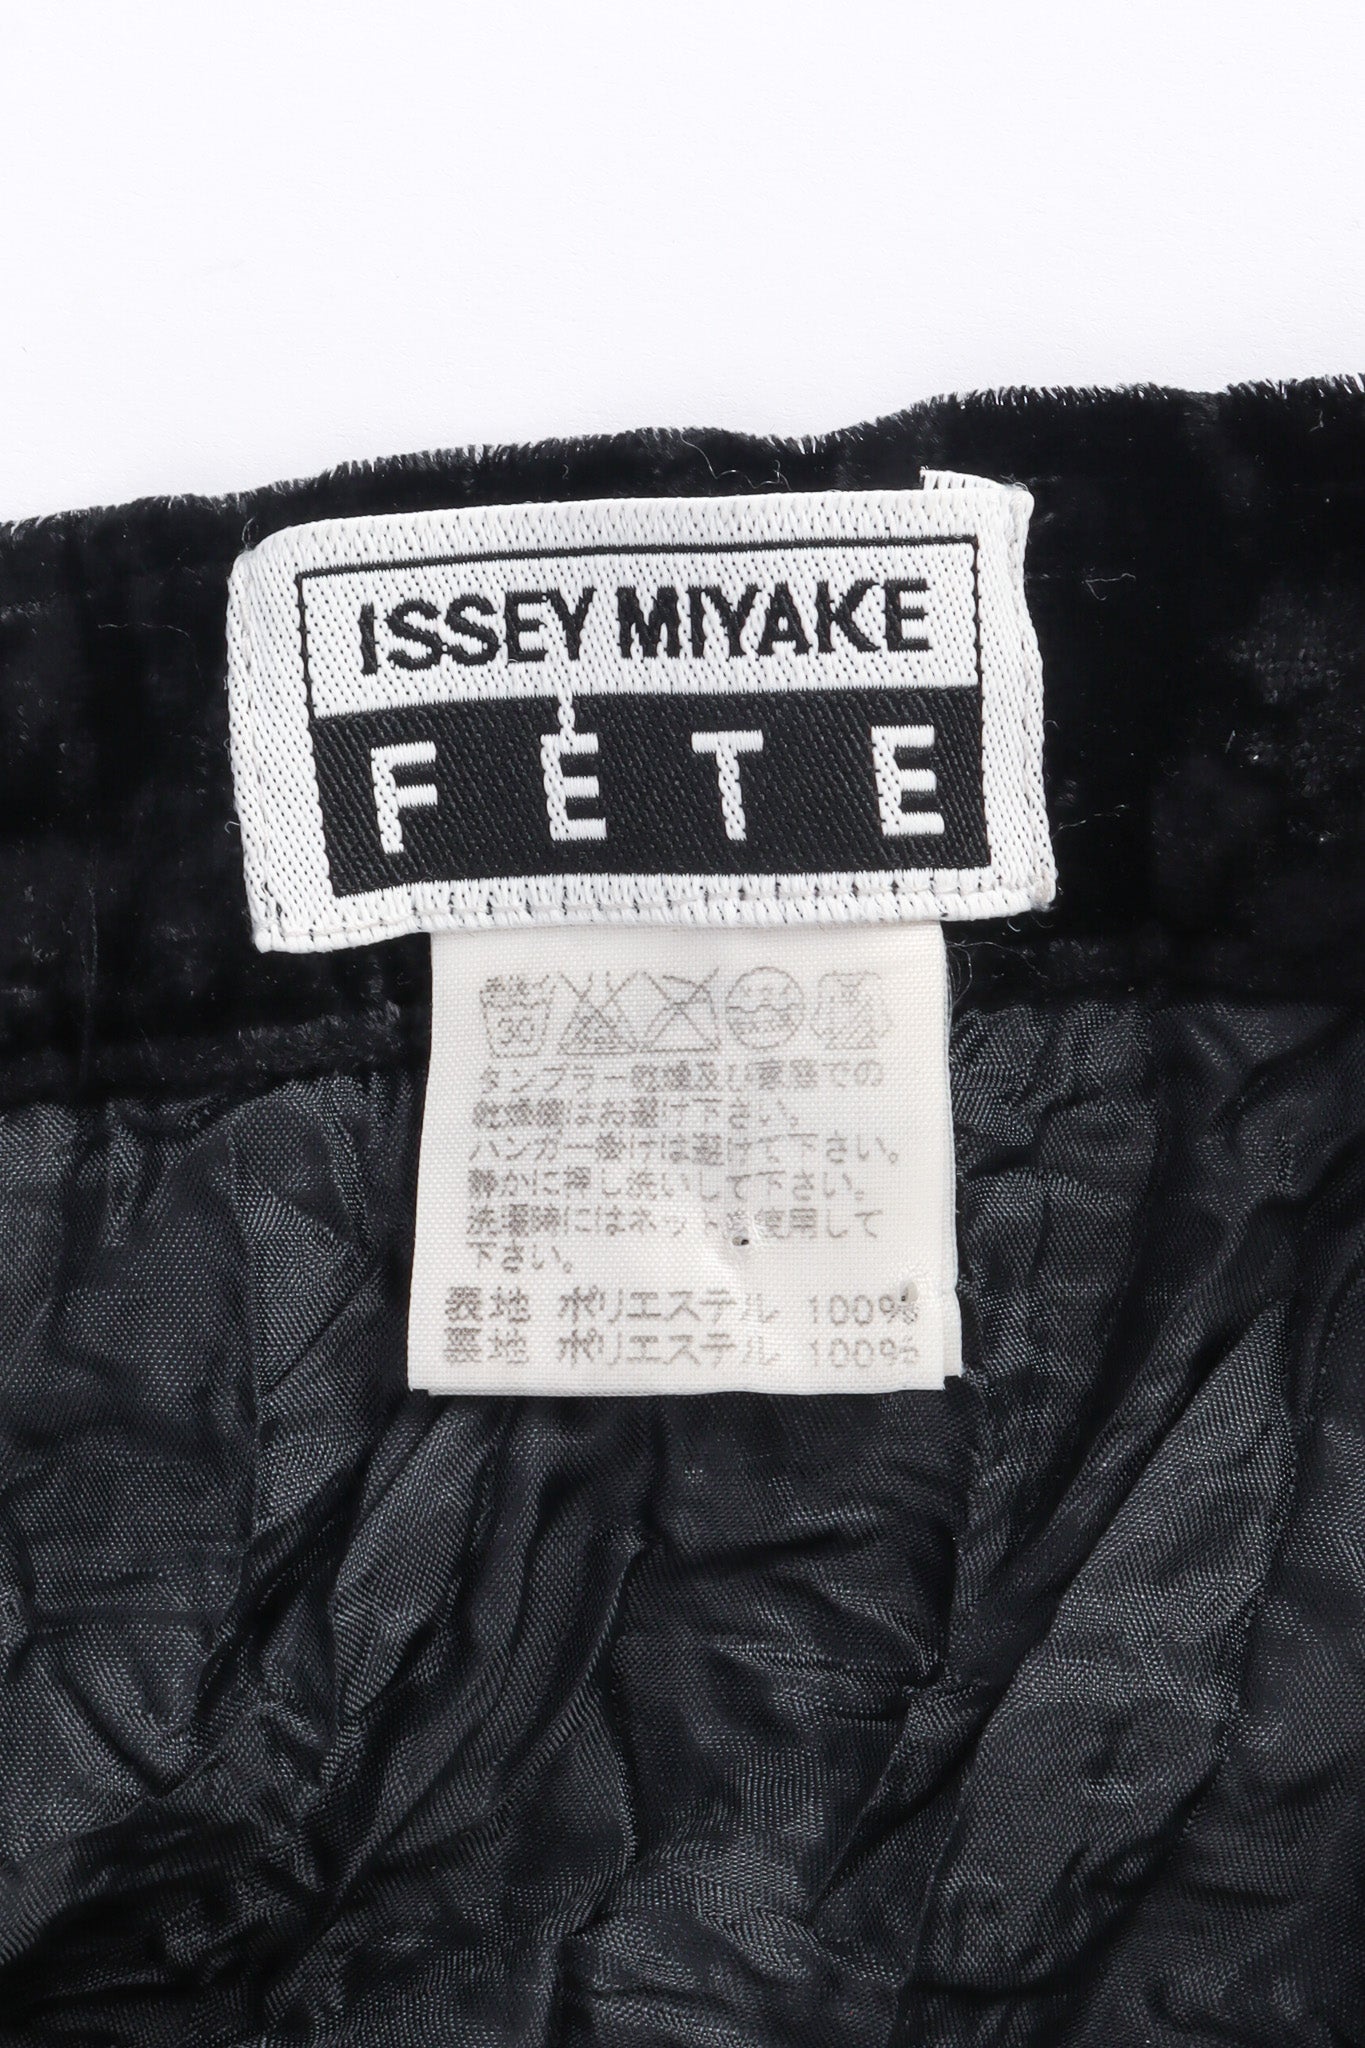 Crushed velvet midi skirt with eyelet lace by Issey Miyake Féte label @recessla